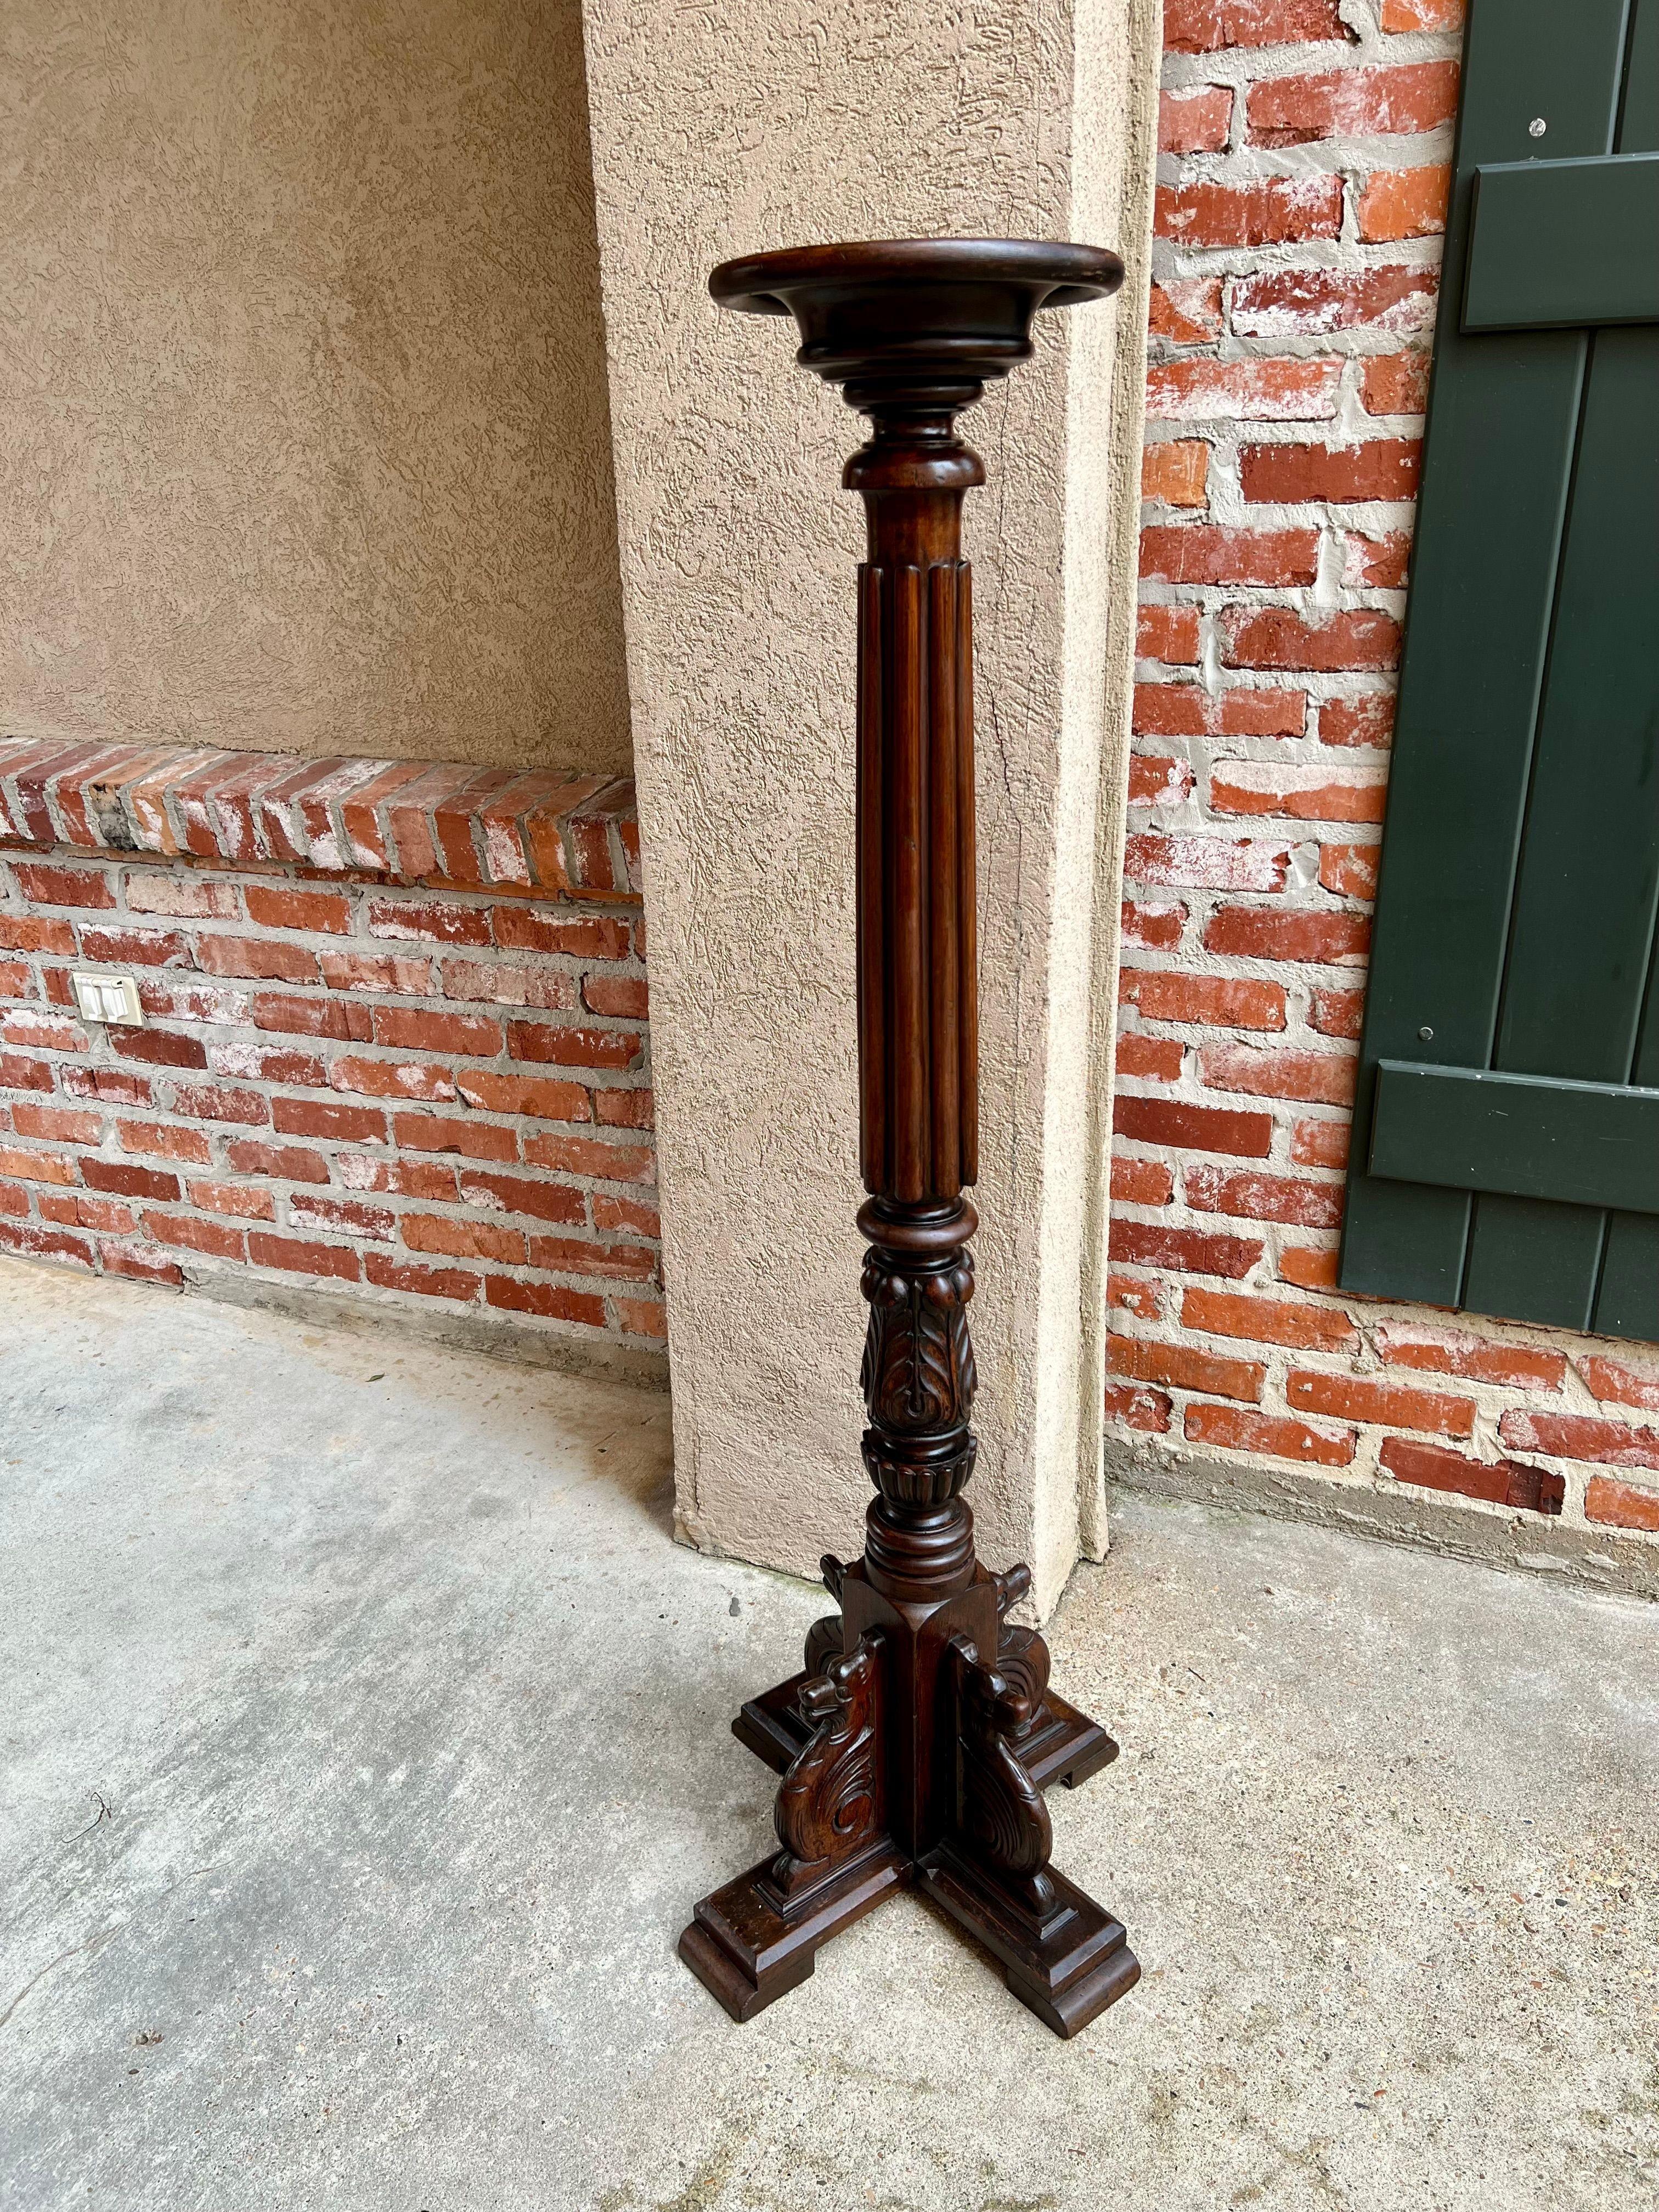 Antique French carved pedestal plant stand bronze column display renaissance.

Direct from France, a tall and well carved pedestal/plant stand.
Round disc top over a multiple level turned disc platform. Tall baluster has thick, reeded portion above